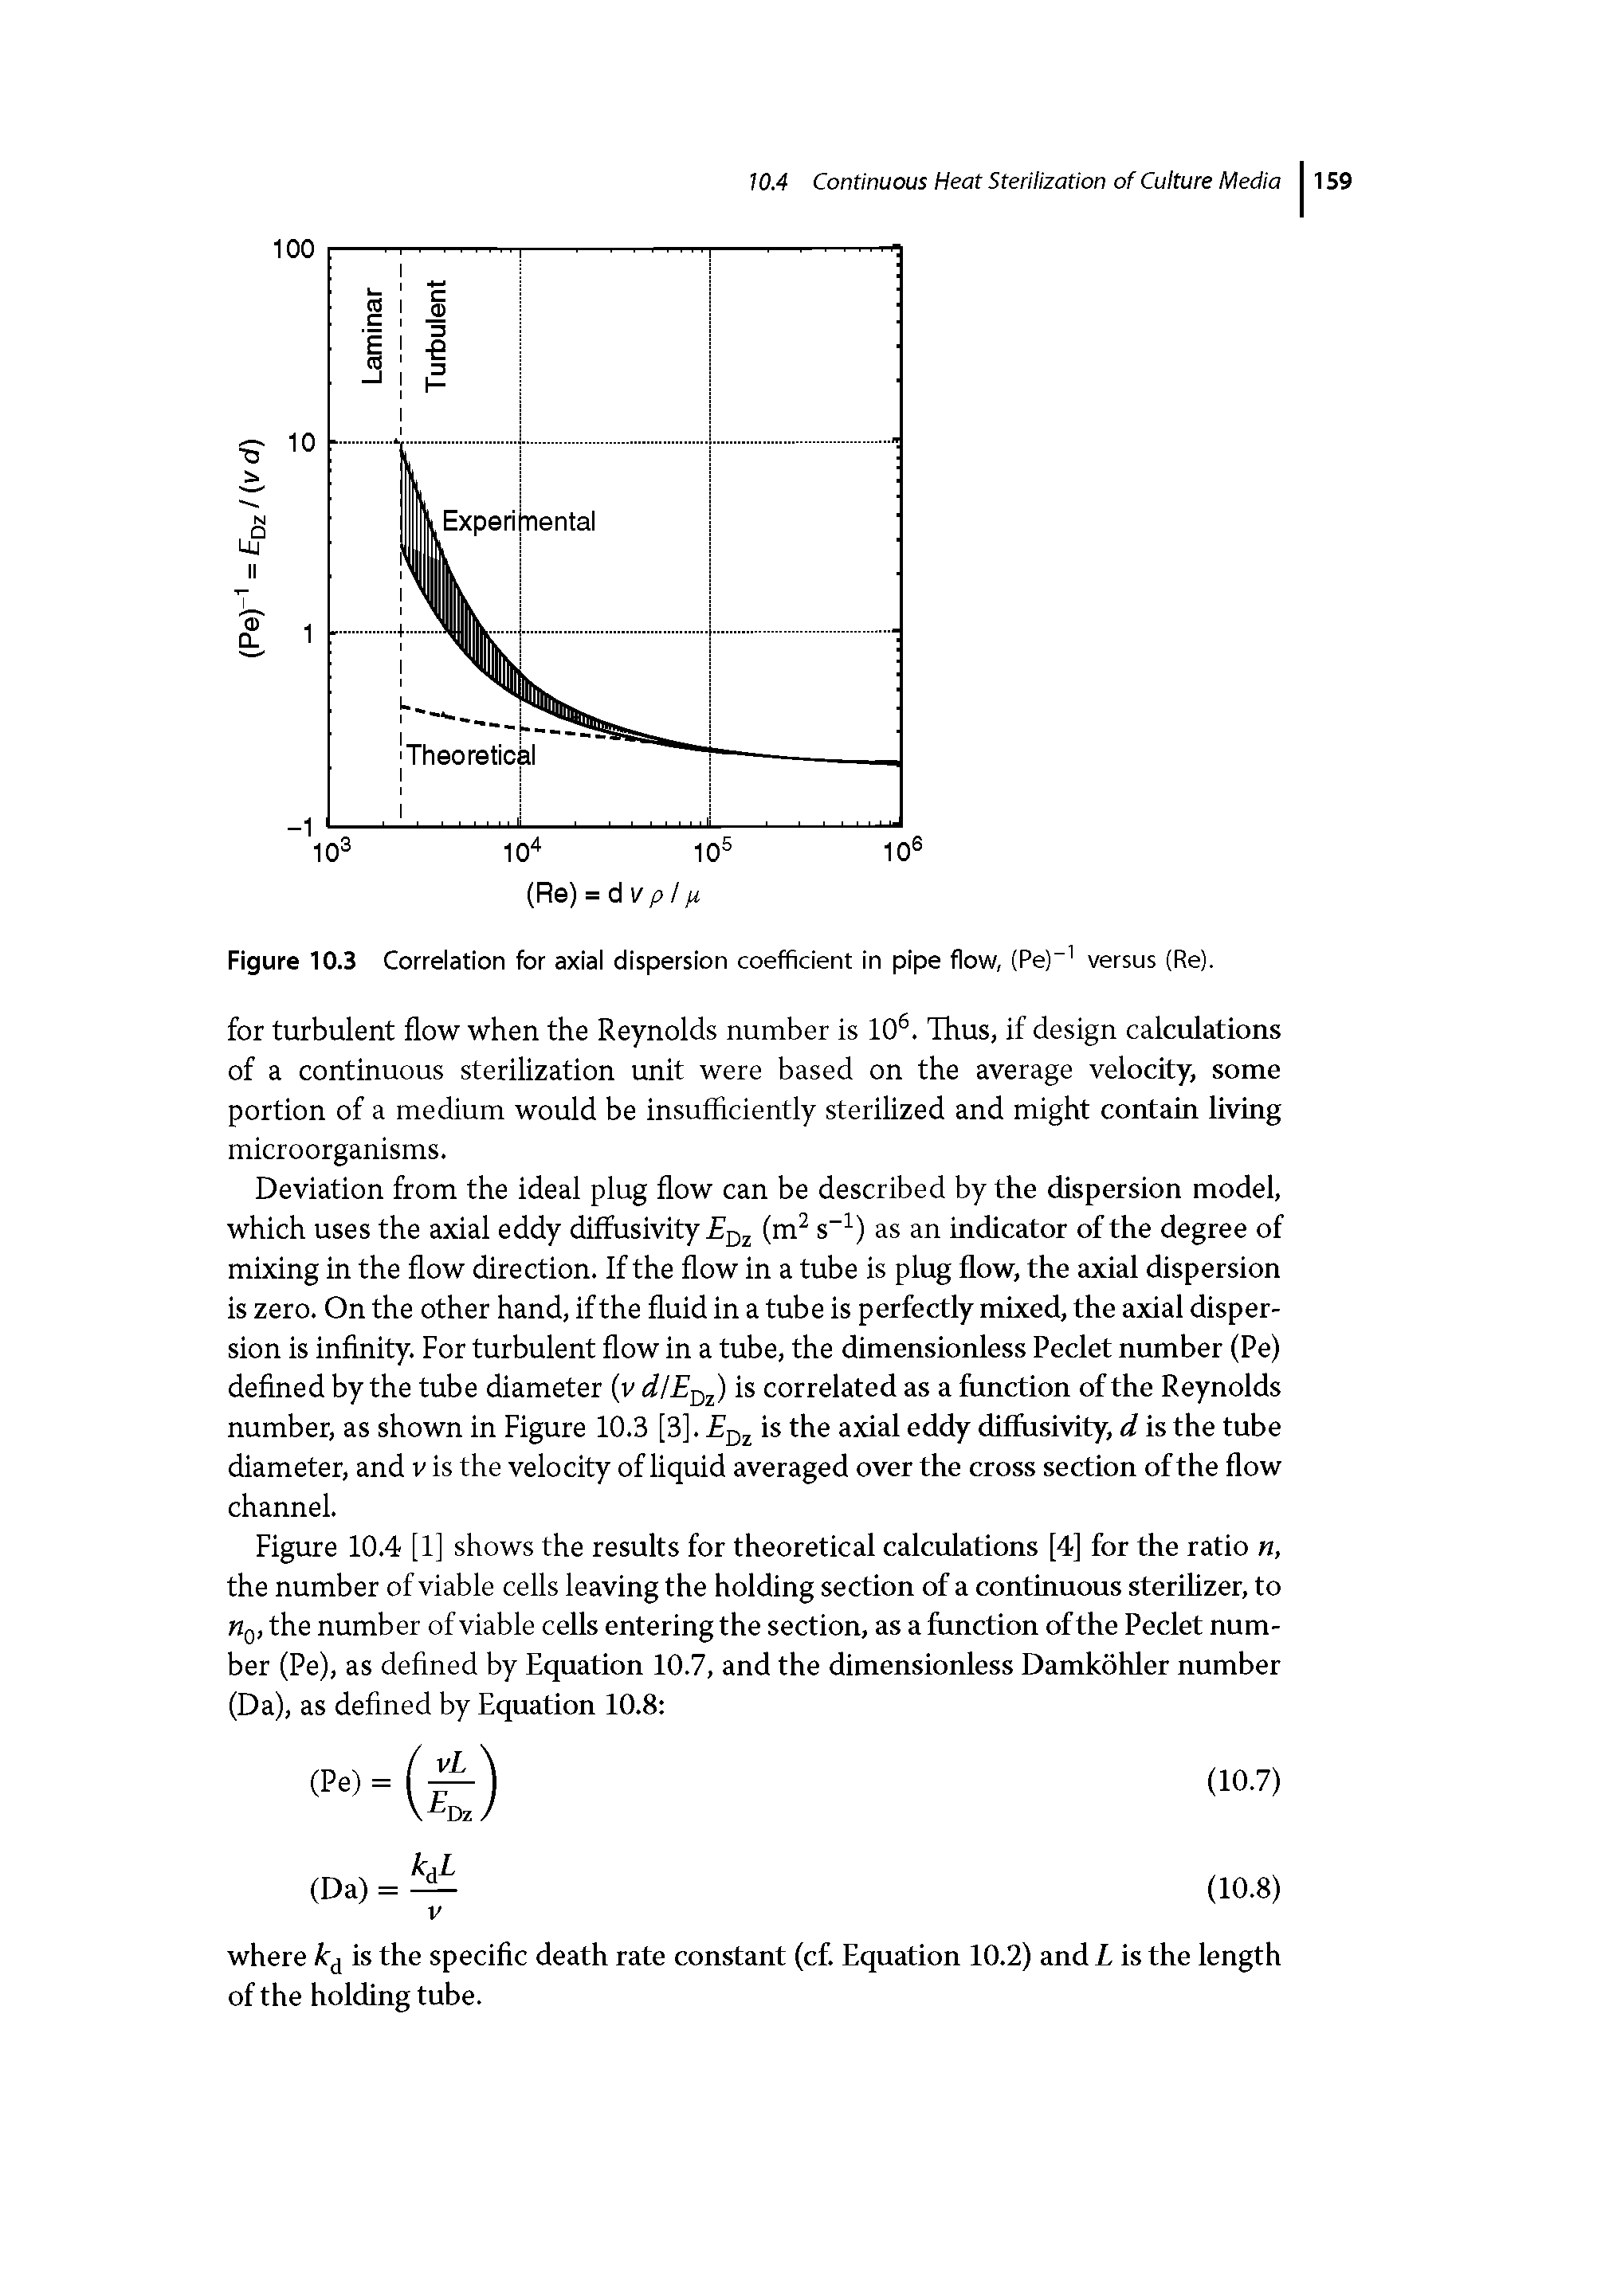 Figure 10.3 Correlation for axial dispersion coefficient In pipe flow, (Pe) versus (Re).